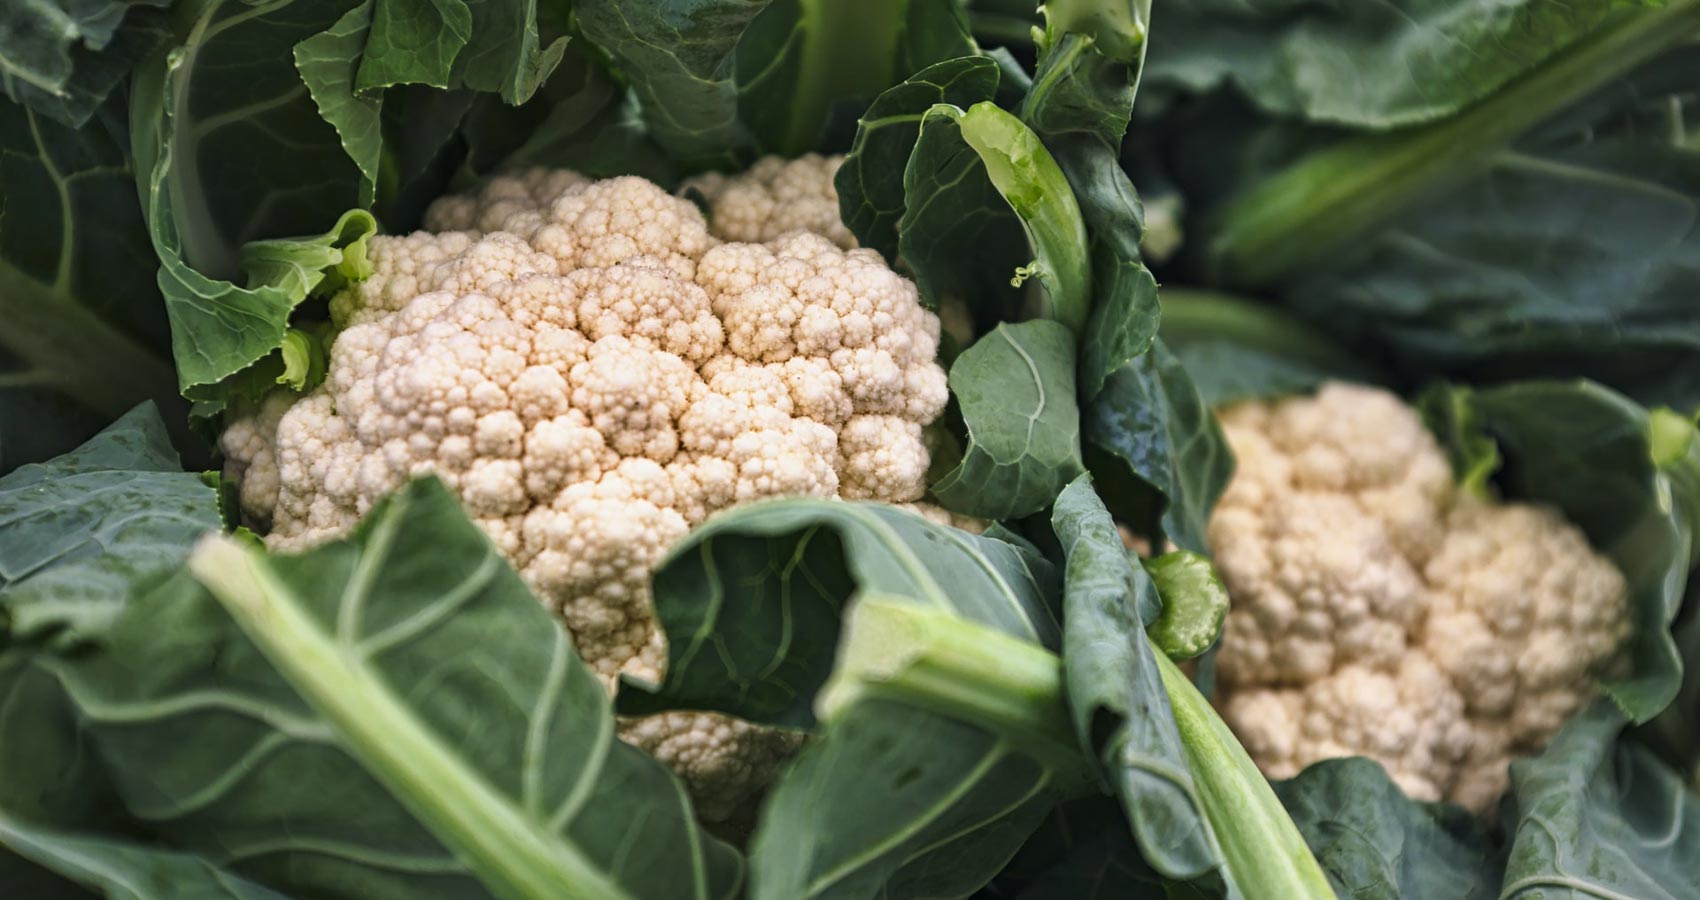 Cauliflower Patch, a poem by Clive Grewcock at Spillwords.com